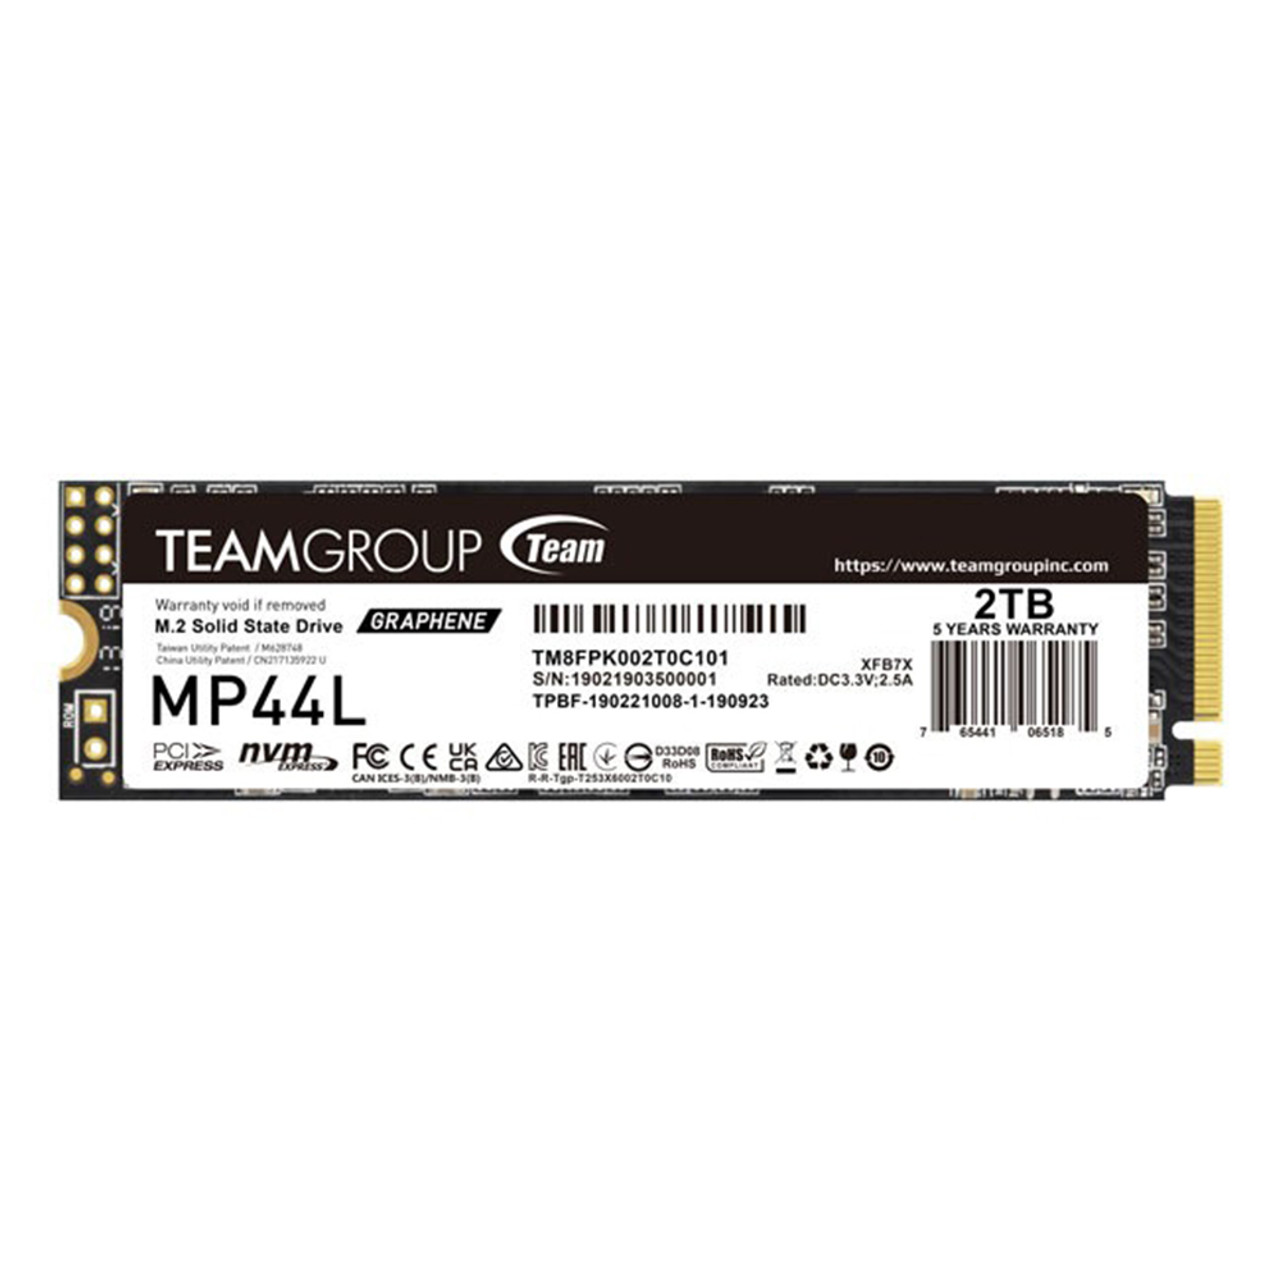 Industrial PCIe® Gen 4 x4  M.2 NVMe 1.4 SSD with onboard DRAM